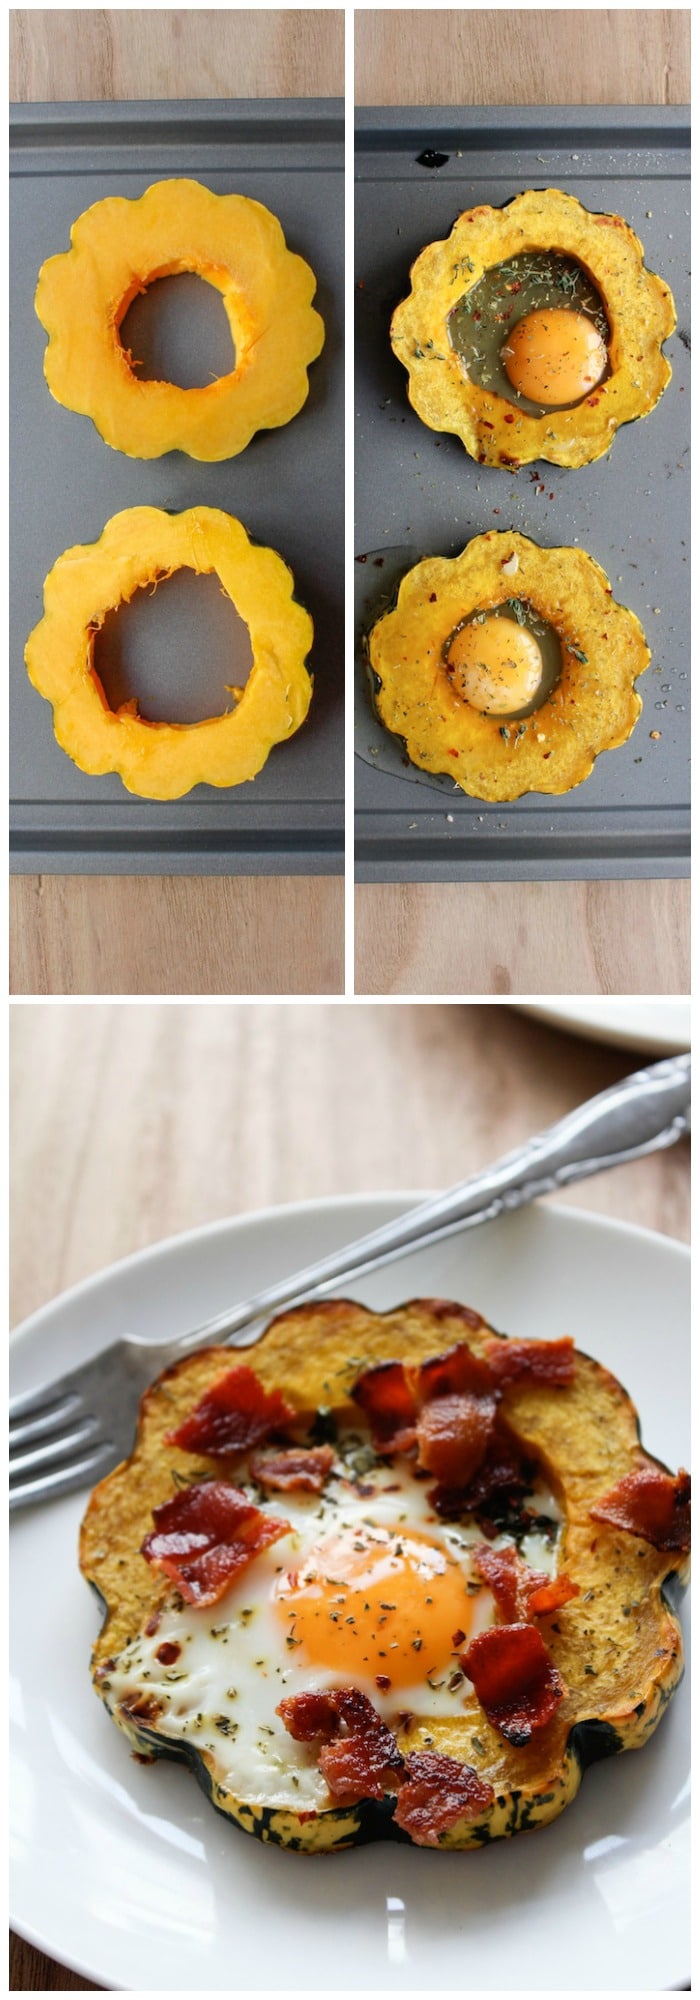 Baked Eggs in Squash Rings, a paleo/whole 30 approved breakfast @asaucykitchen